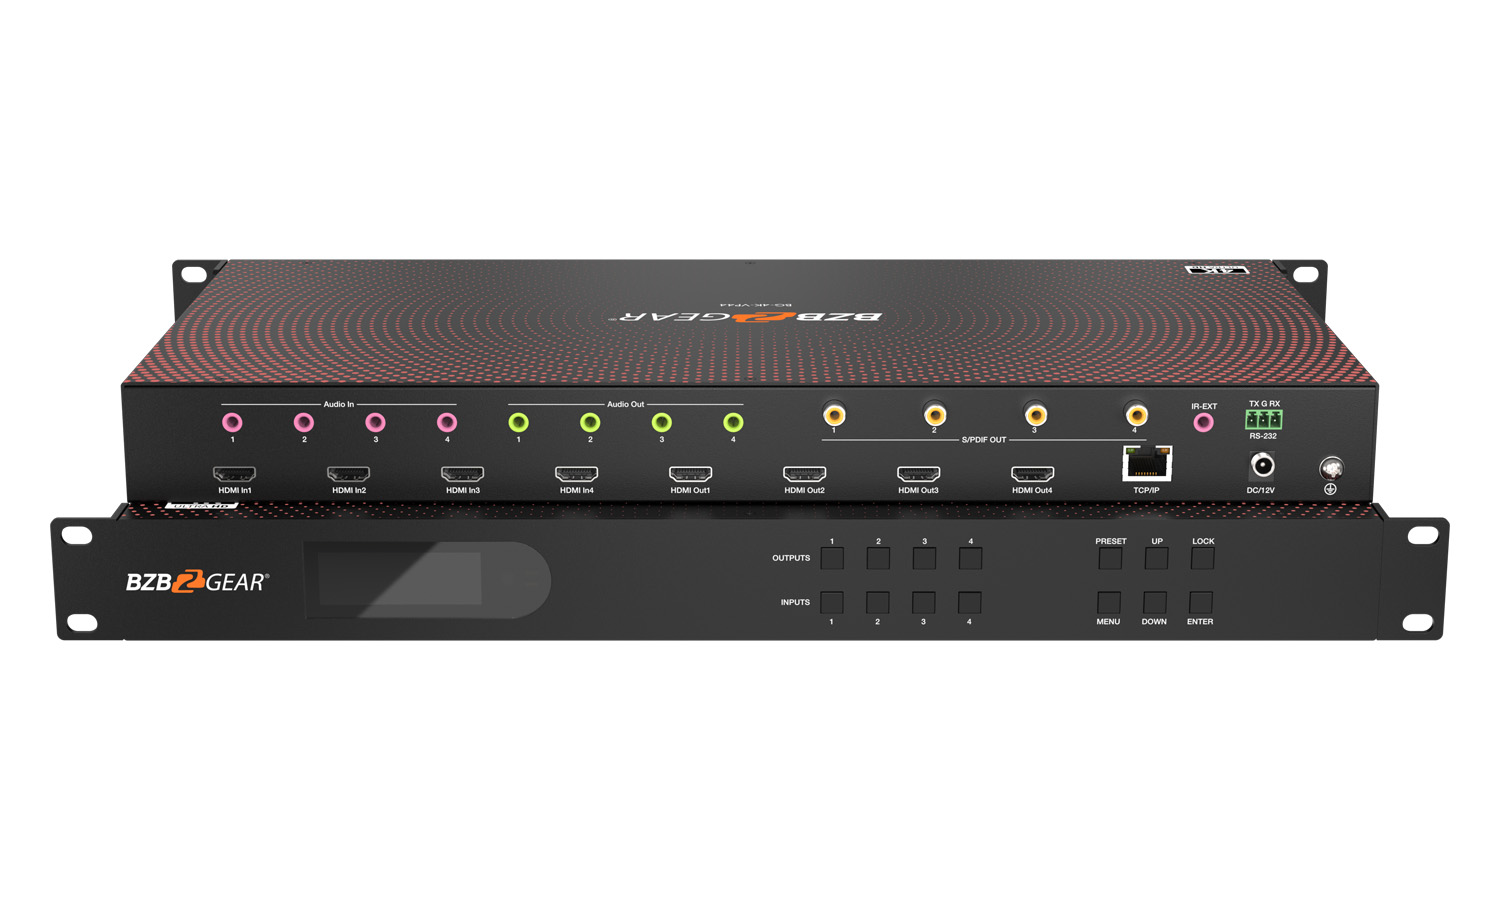 BG-4K-VP44 4x4 4K UHD Seamless HDMI Matrix Switcher/Video Wall Processor/MultiViewer with Scaler/IR/Audio/IP and RS-232 by BZBGEAR